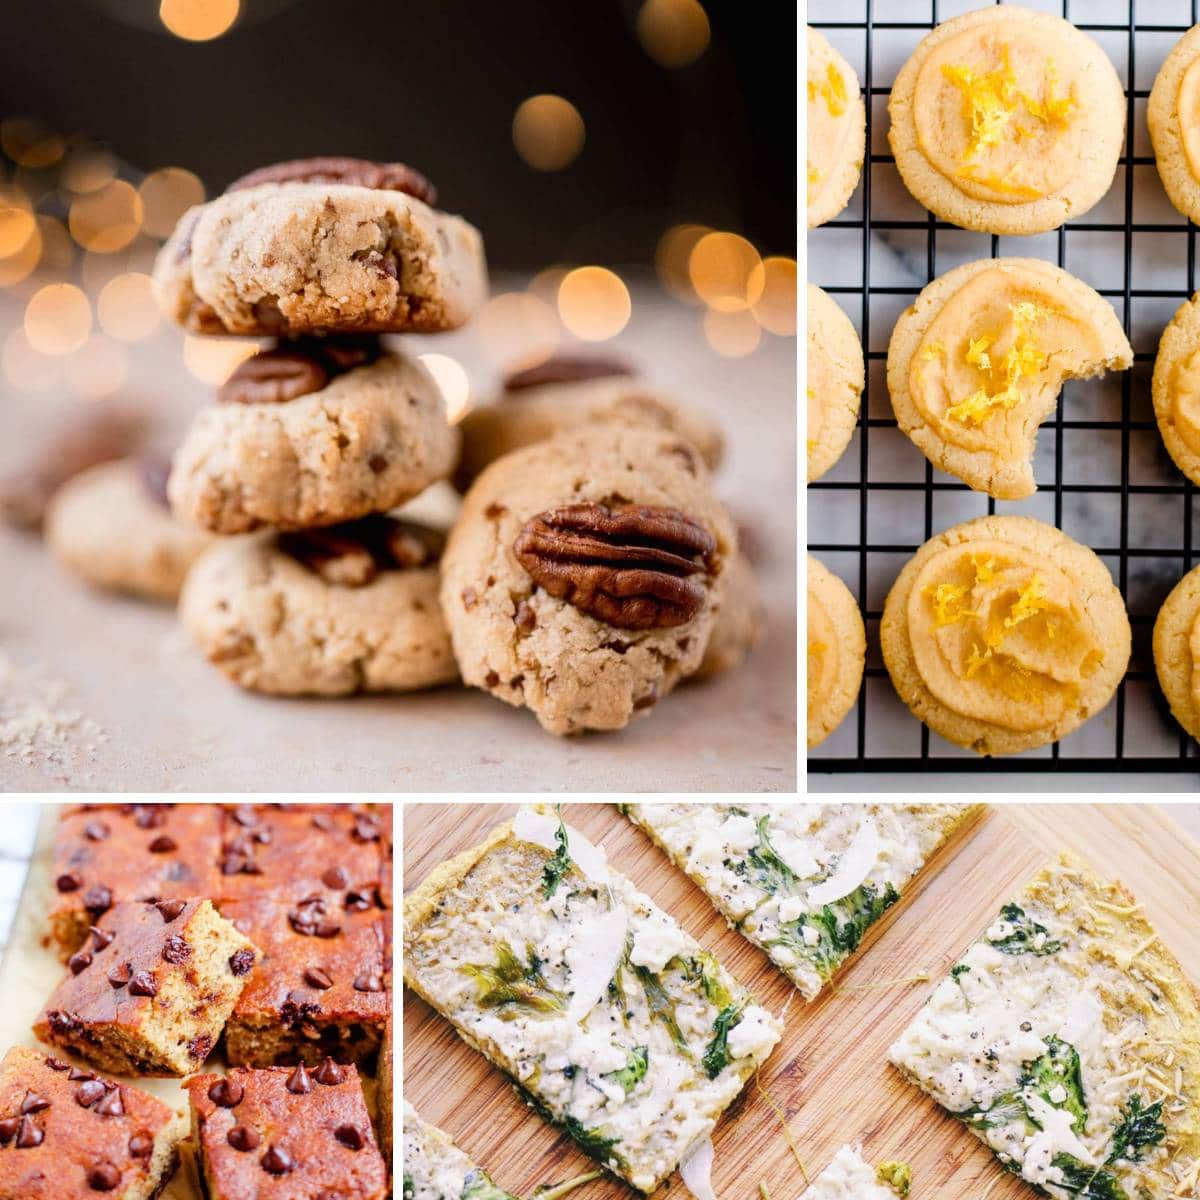 A collage of pictures of cookies and other baked goods.